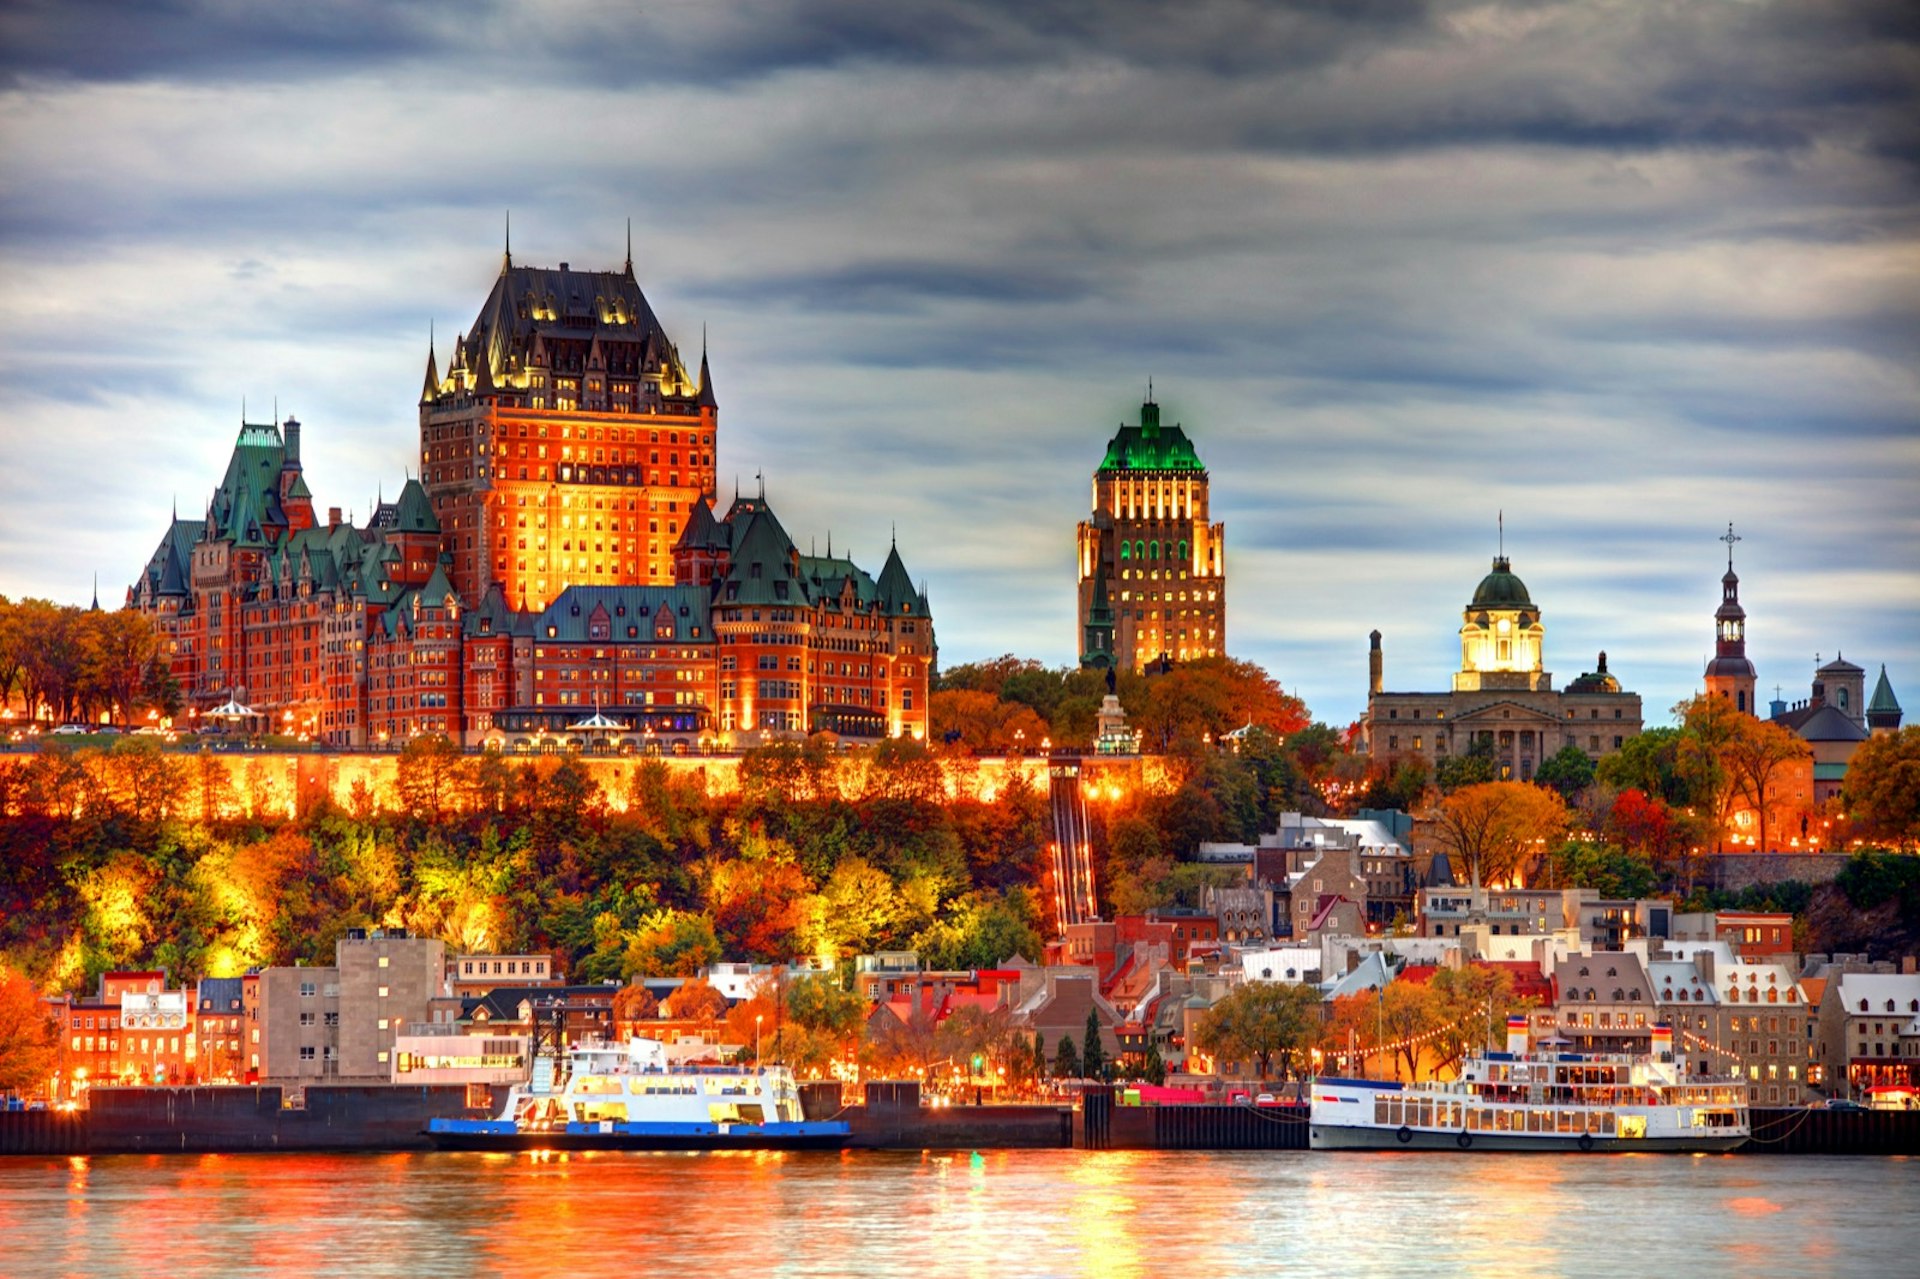 Orange lights reflect the skyline of Quebec City in the river below. Best day trips from Montréal